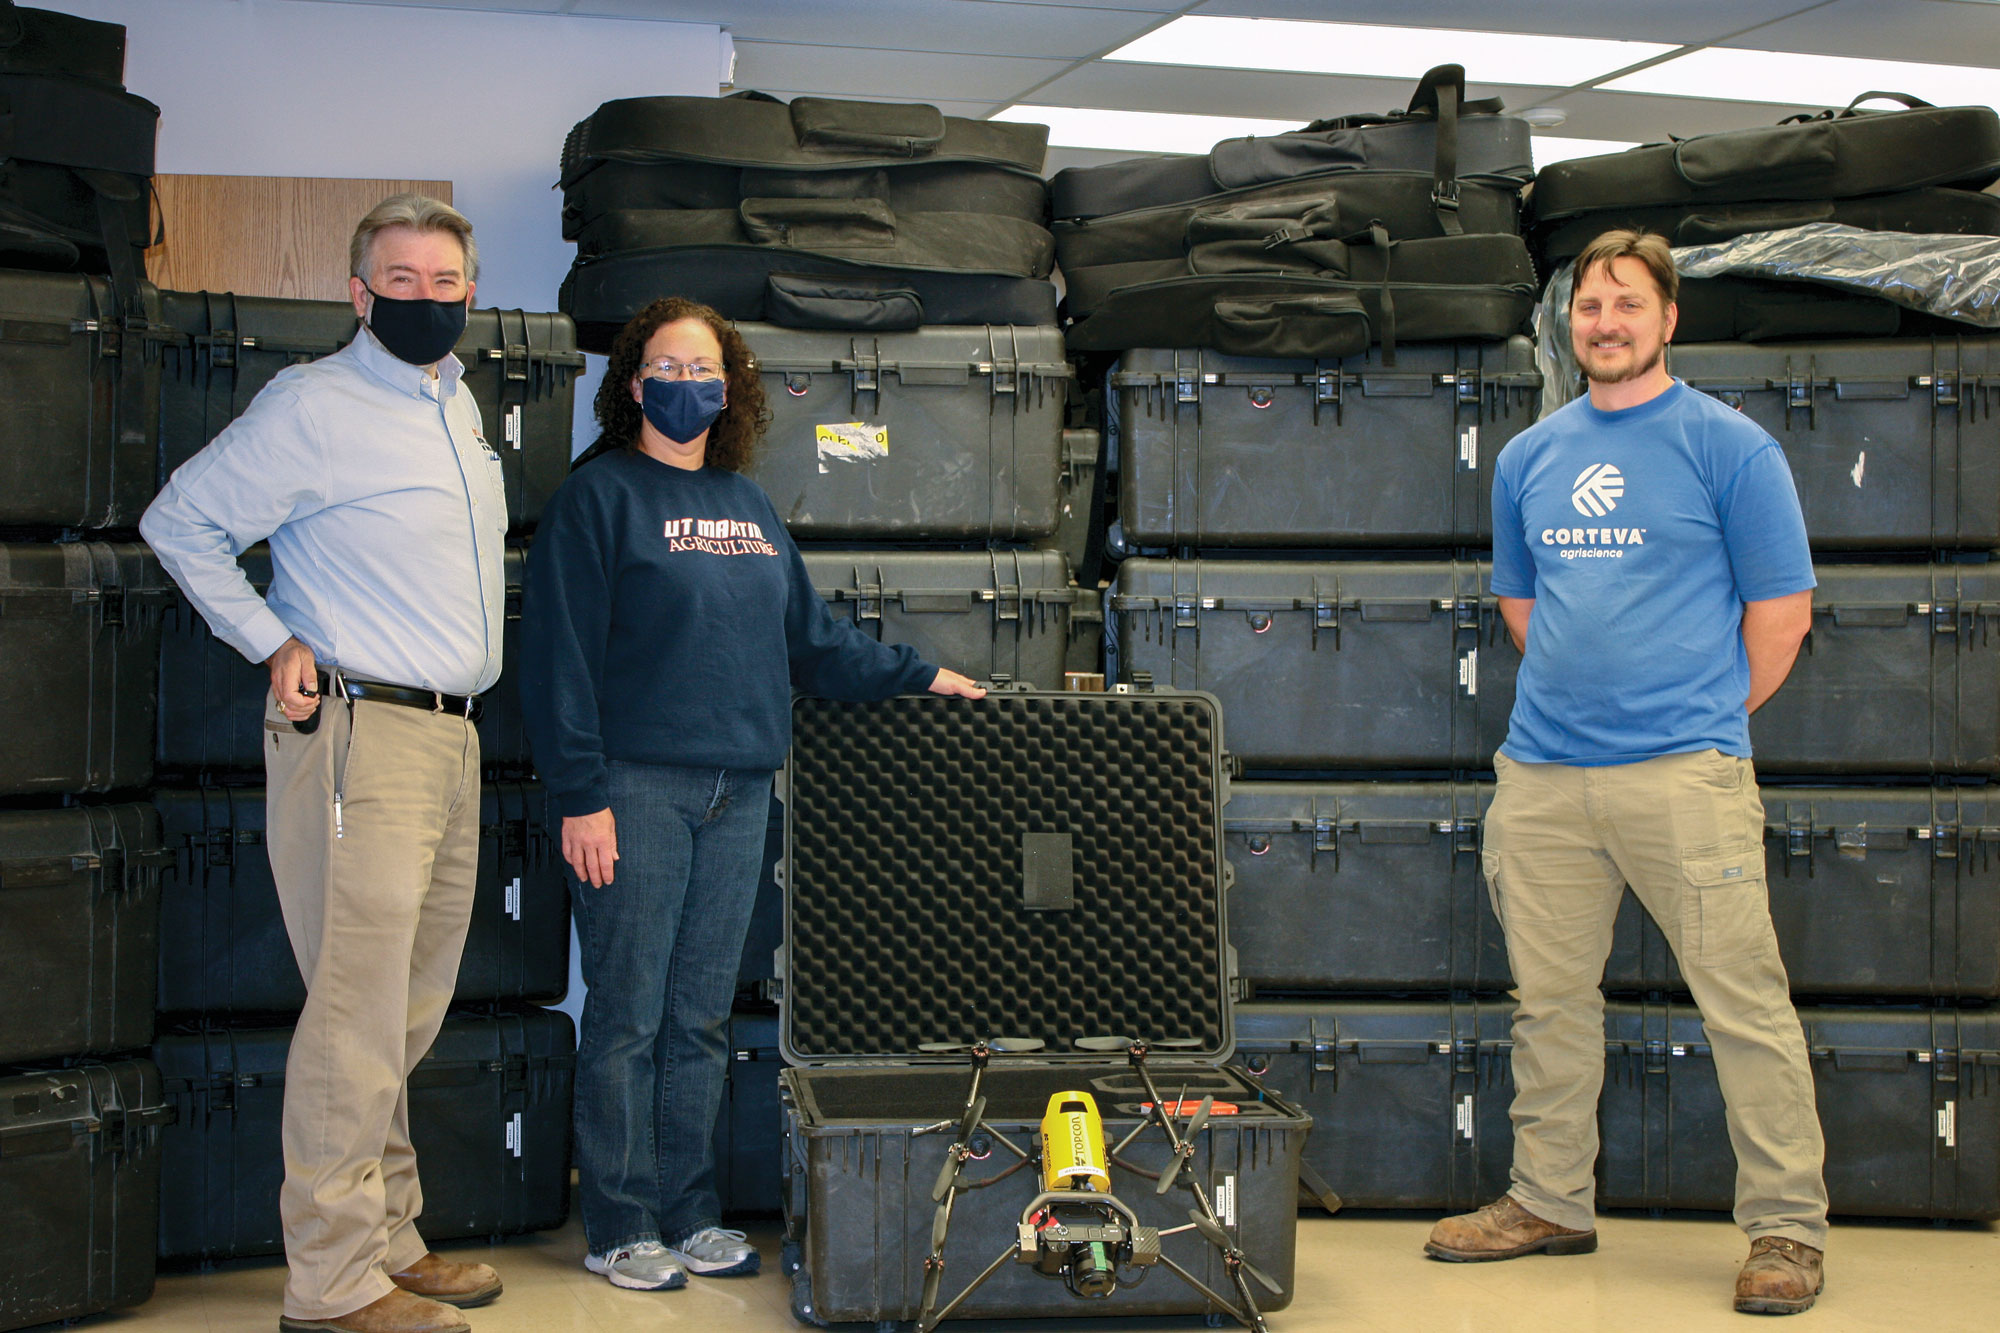 Three people stand in front of stacks of cases of aerial drone equipment